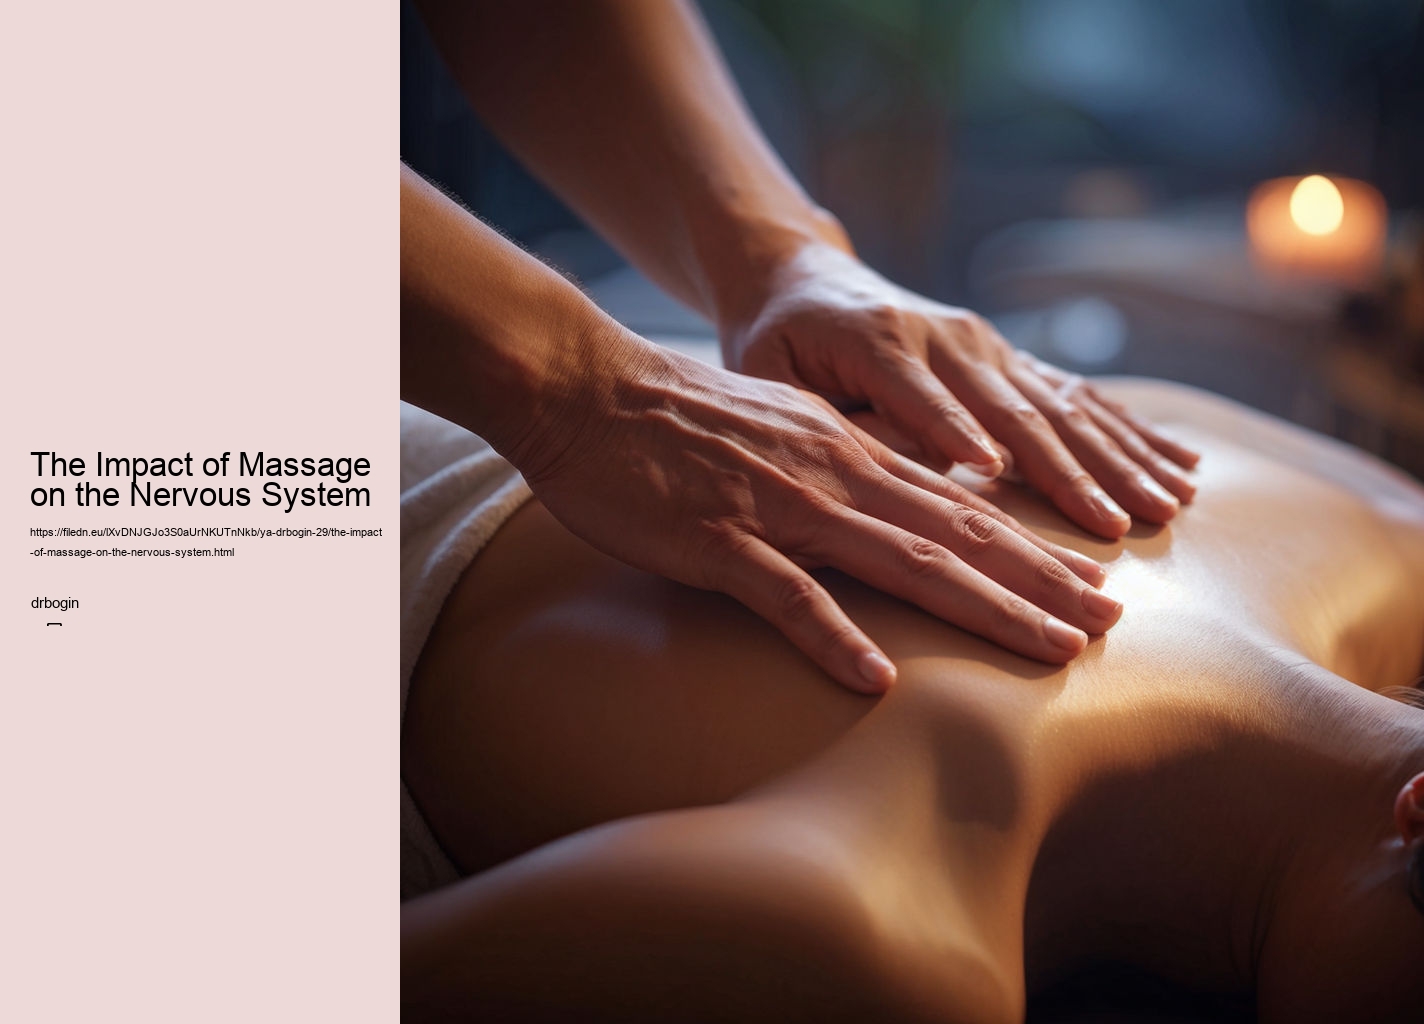 The Impact of Massage on the Nervous System